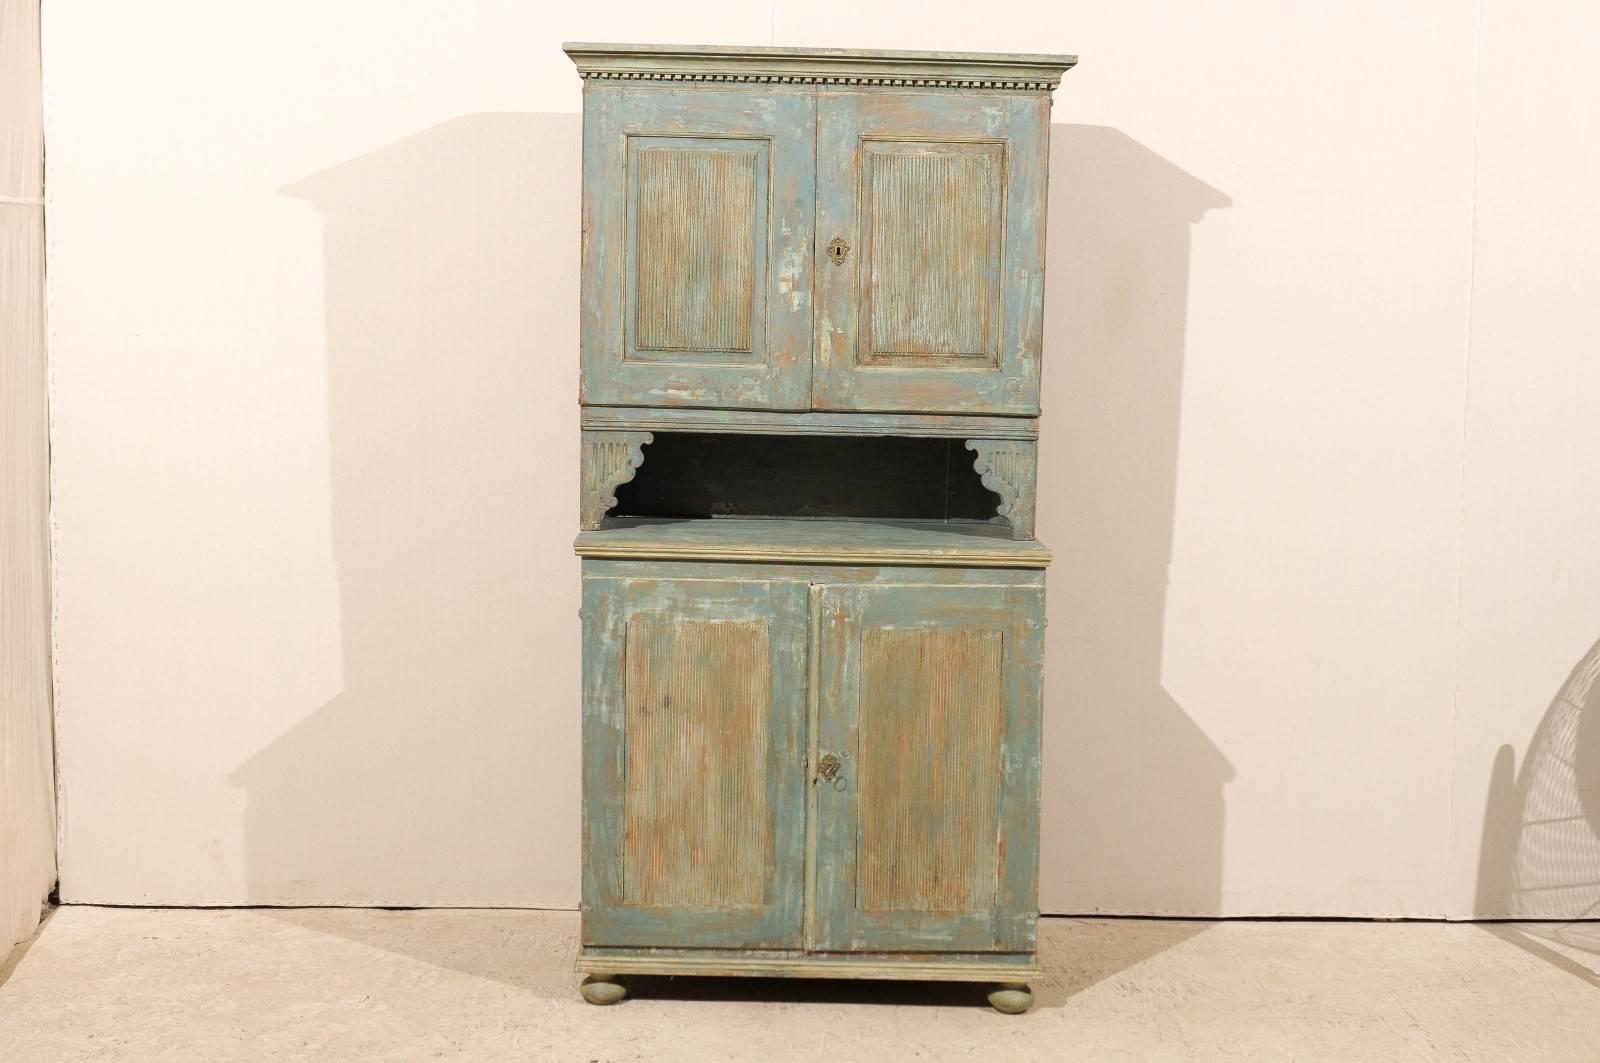 An 18th century Swedish late Gustavian cabinet with original paint. This painted wood cabinet features two reeded doors topped with a dentil molding. A pair of brackets/ volutes connect the top part to the lower doors, also reeded. The doors open up